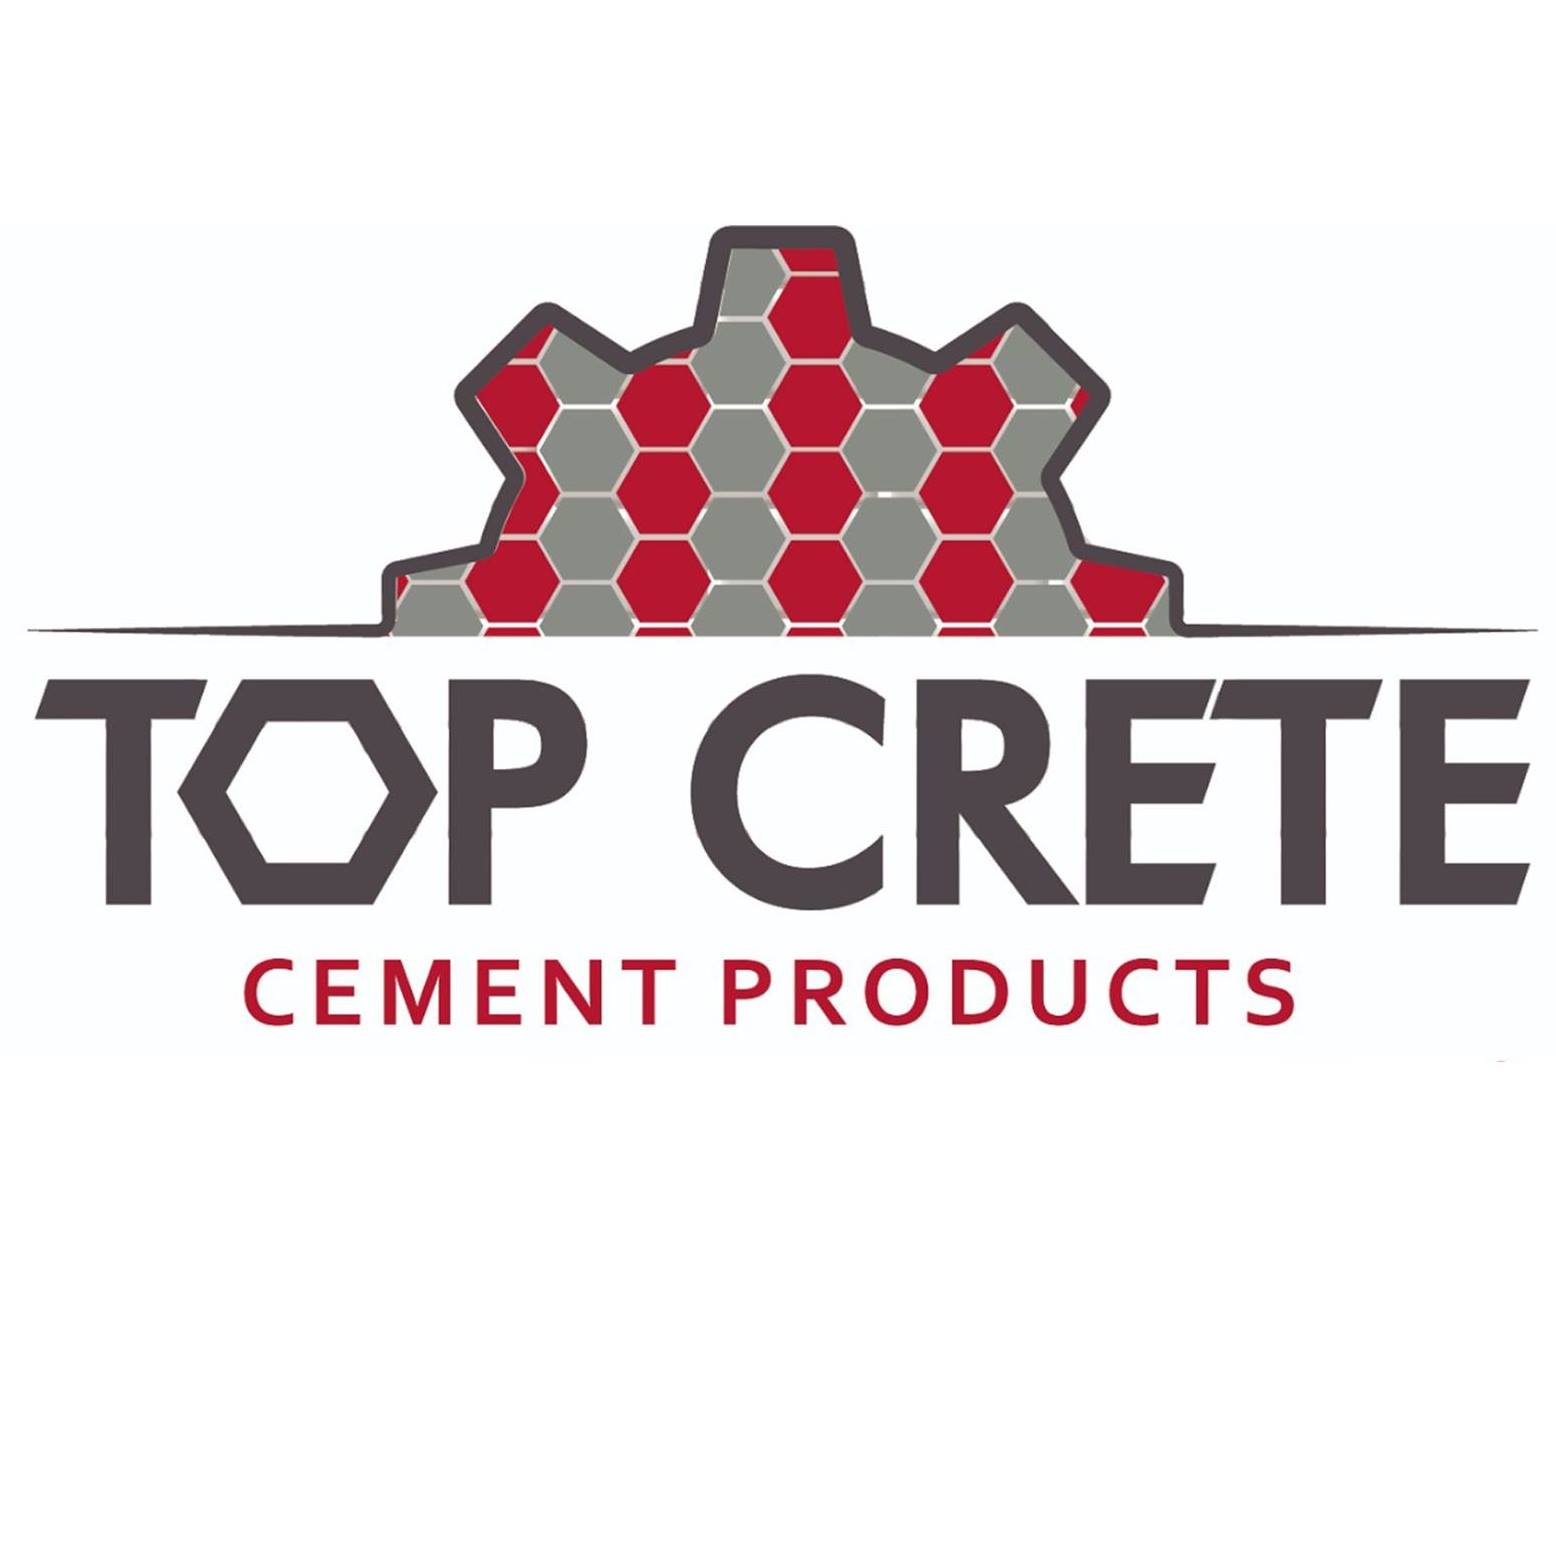 Top Crete Cement Products